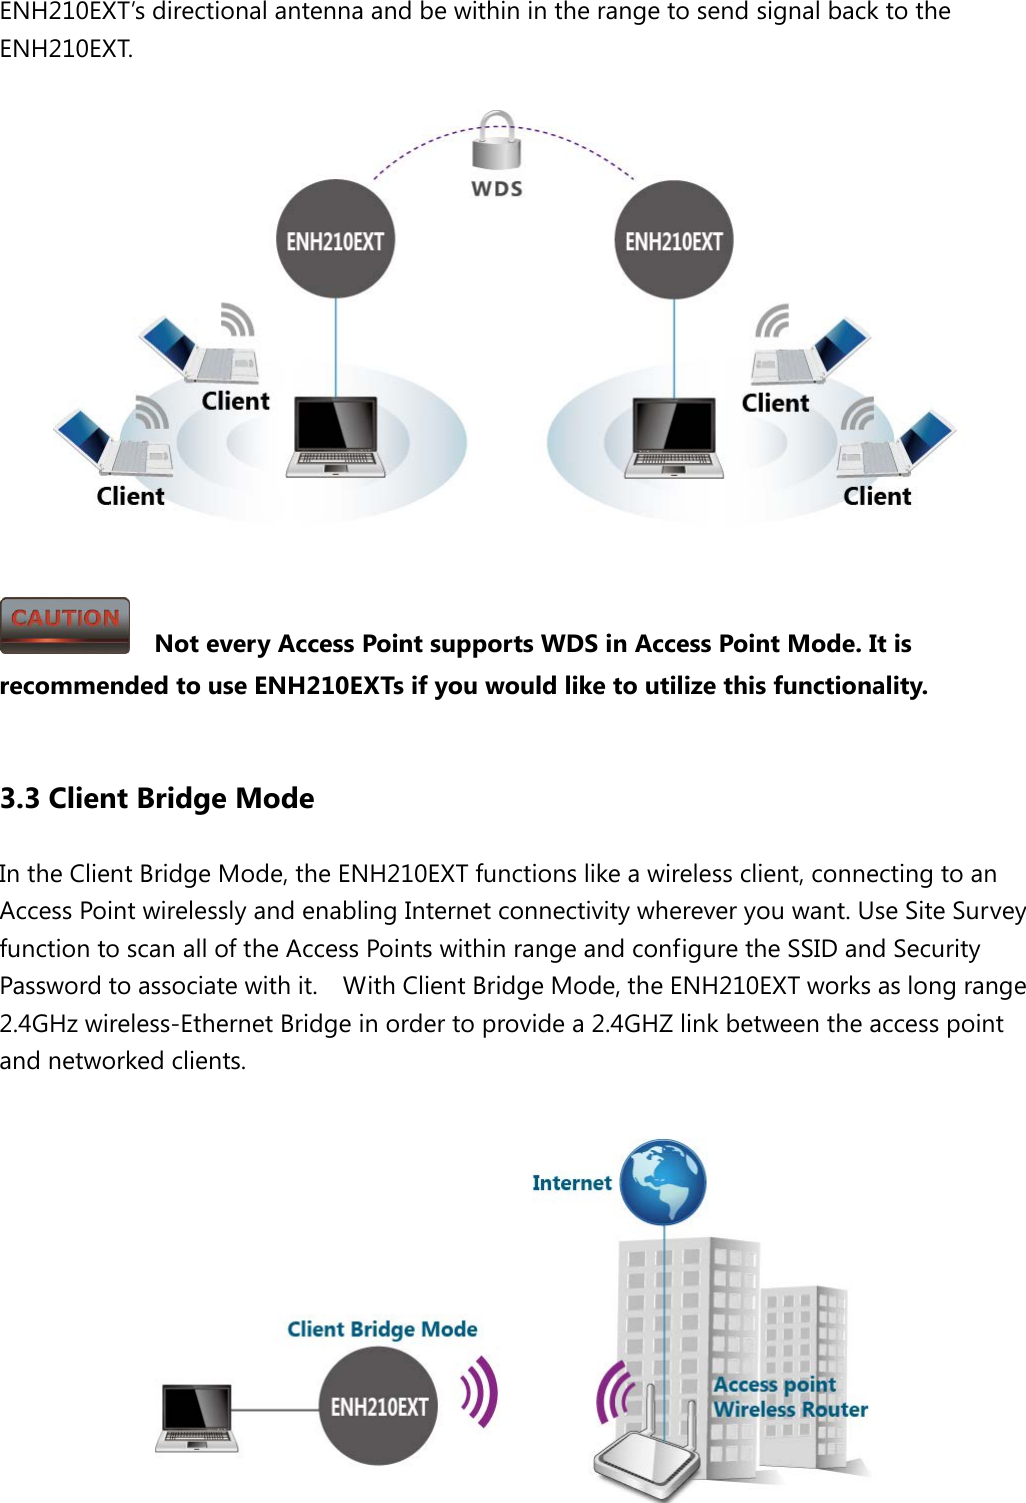 ENH210EXT’s directional antenna and be within in the range to send signal back to the ENH210EXT.        Not every Access Point supports WDS in Access Point Mode. It is recommended to use ENH210EXTs if you would like to utilize this functionality.  3.3 Client Bridge Mode In the Client Bridge Mode, the ENH210EXT functions like a wireless client, connecting to an Access Point wirelessly and enabling Internet connectivity wherever you want. Use Site Survey function to scan all of the Access Points within range and configure the SSID and Security Password to associate with it.    With Client Bridge Mode, the ENH210EXT works as long range 2.4GHz wireless-Ethernet Bridge in order to provide a 2.4GHZ link between the access point and networked clients.   